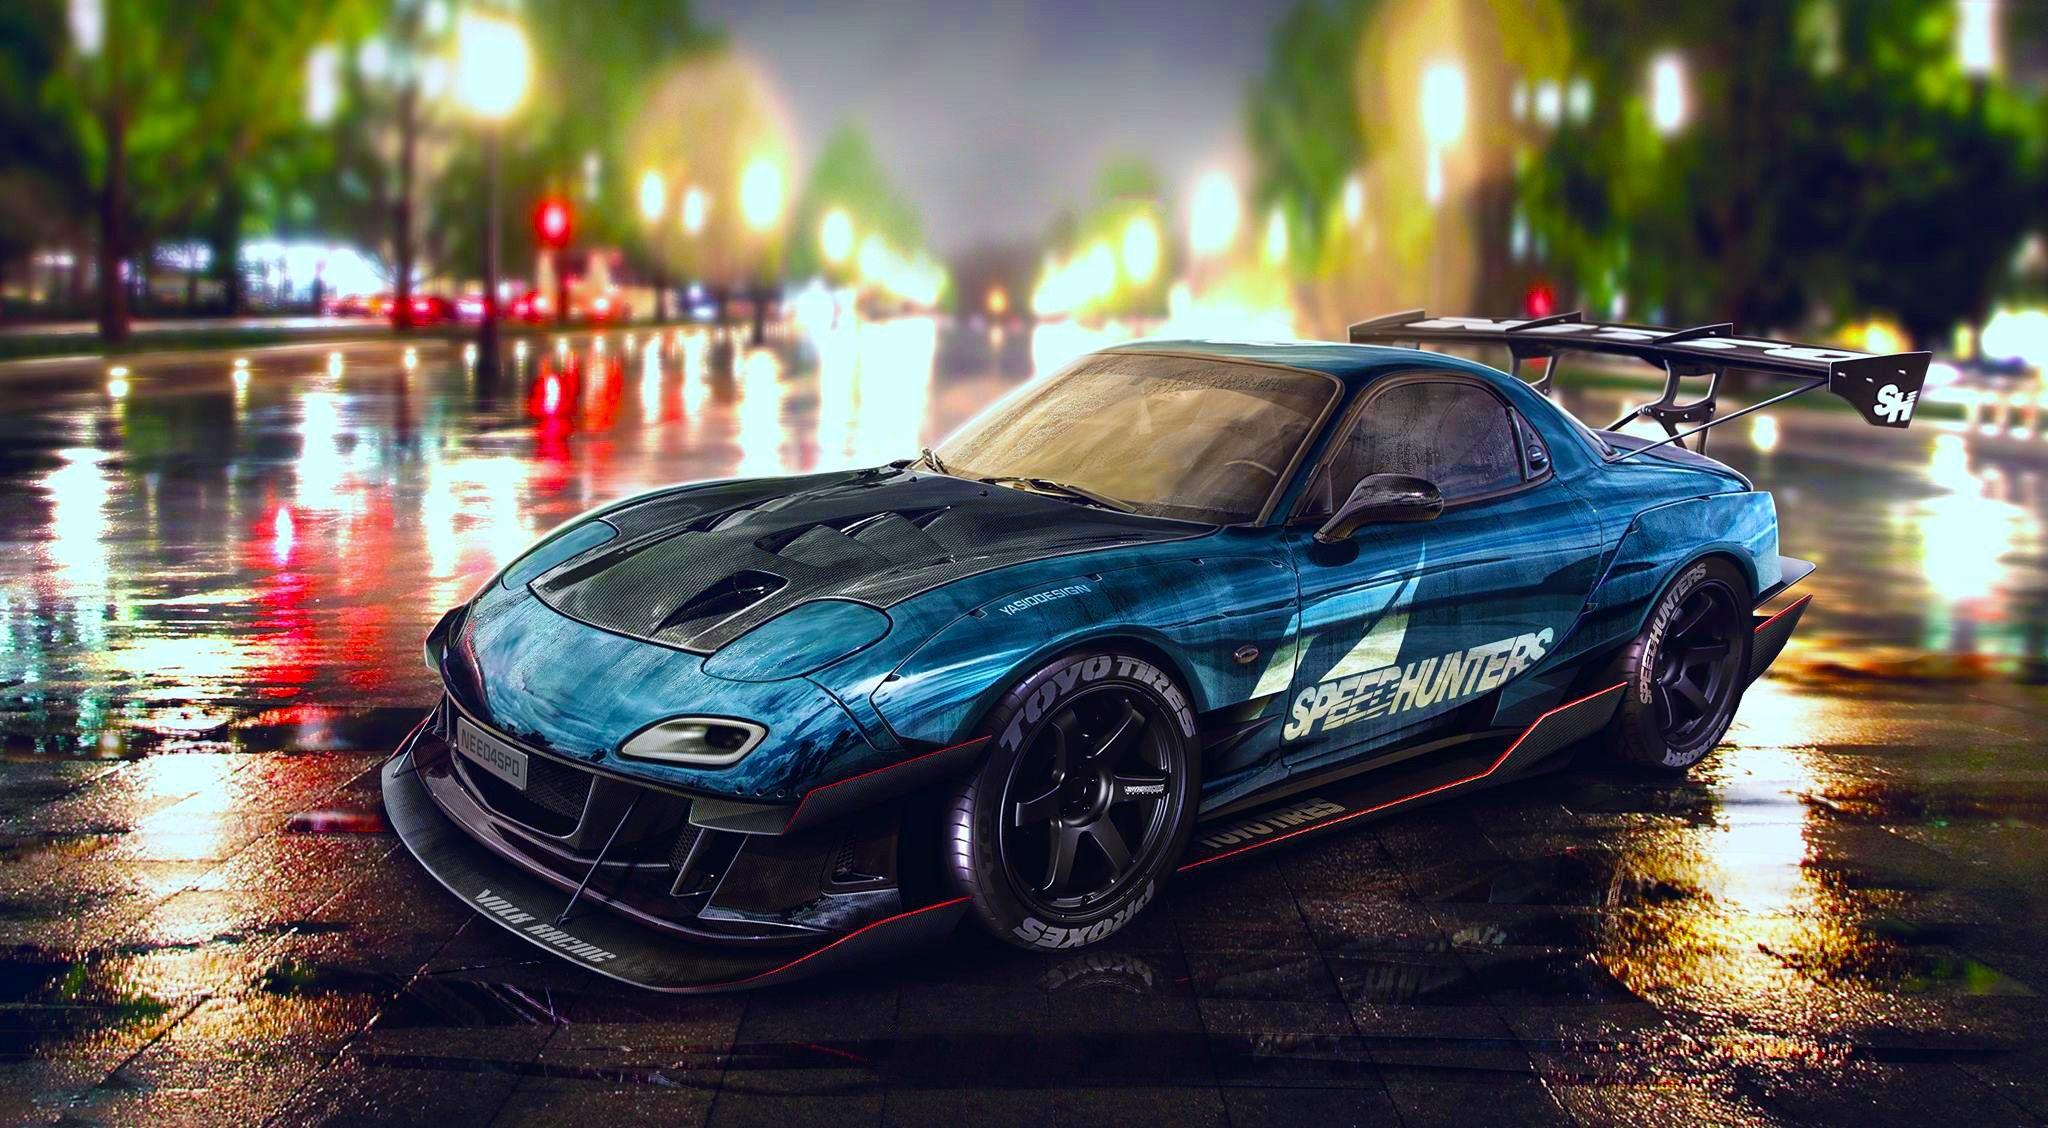 Need for Speed Underground 2 [3840x2160] : r/wallpapers